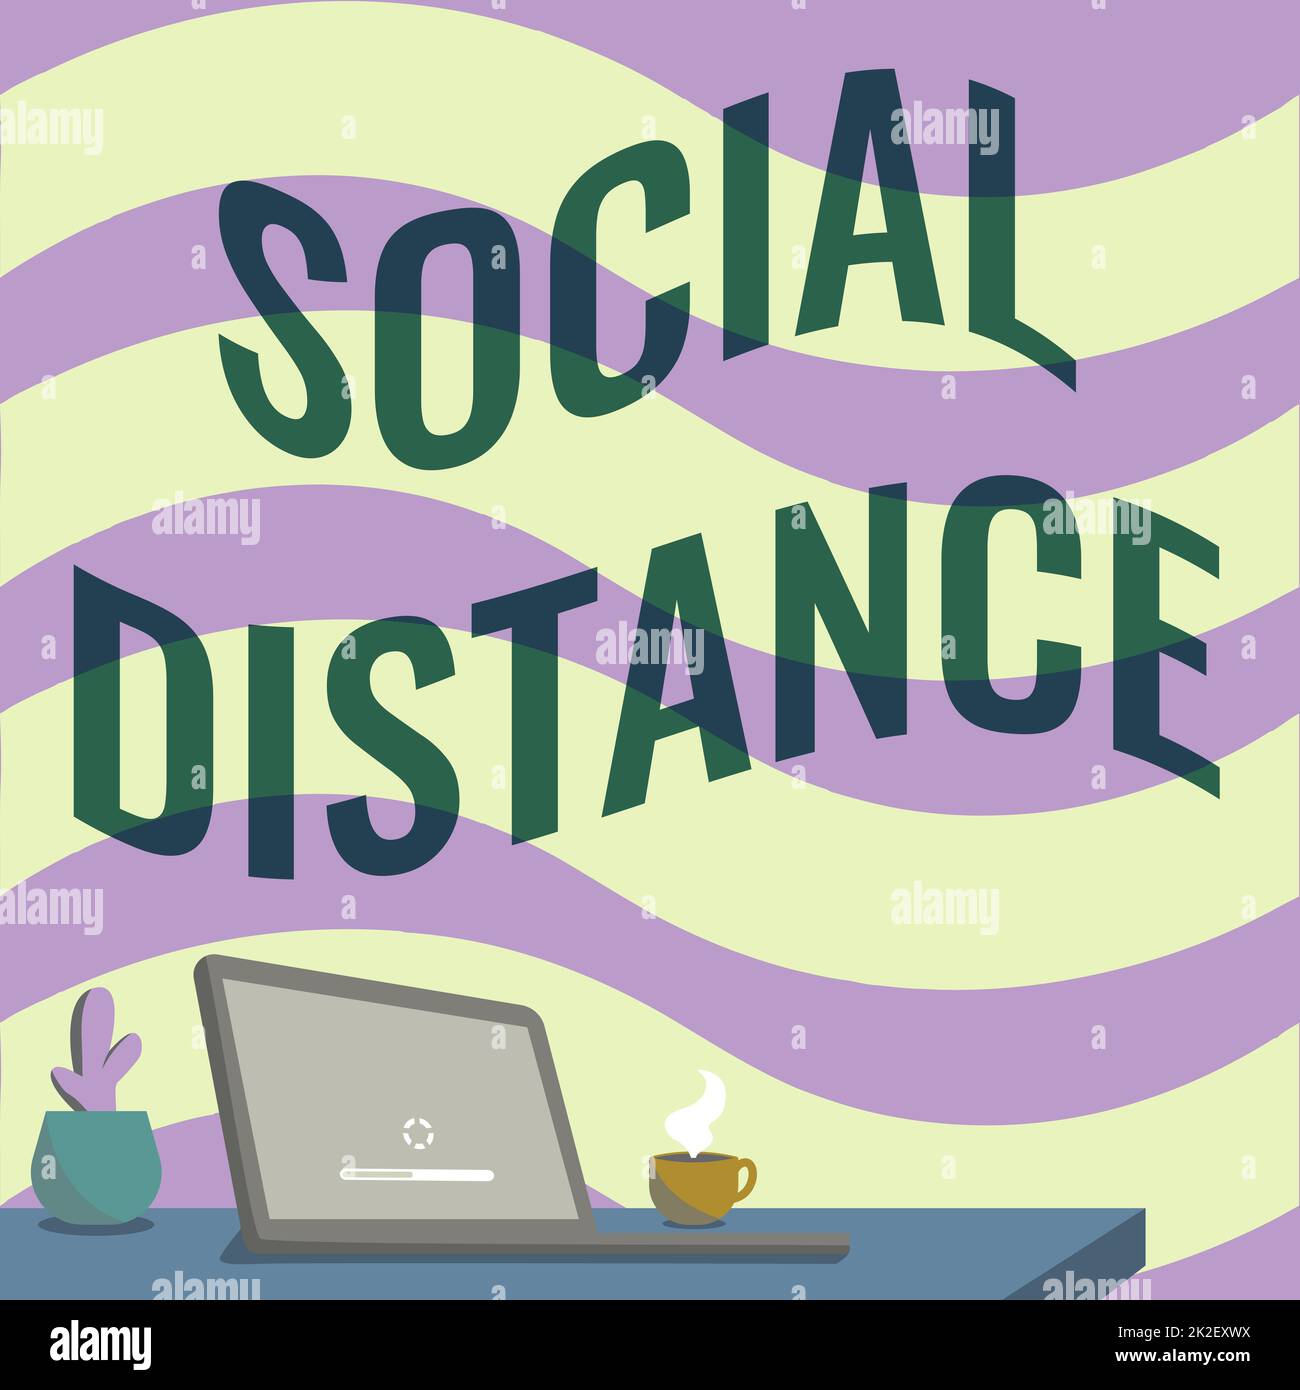 Sign displaying Social Distance. Business approach maintaining a high interval physical distance for public health safety Office Desk Drawing With Laptop Pen Holder And An Open And Arranged Stock Photo